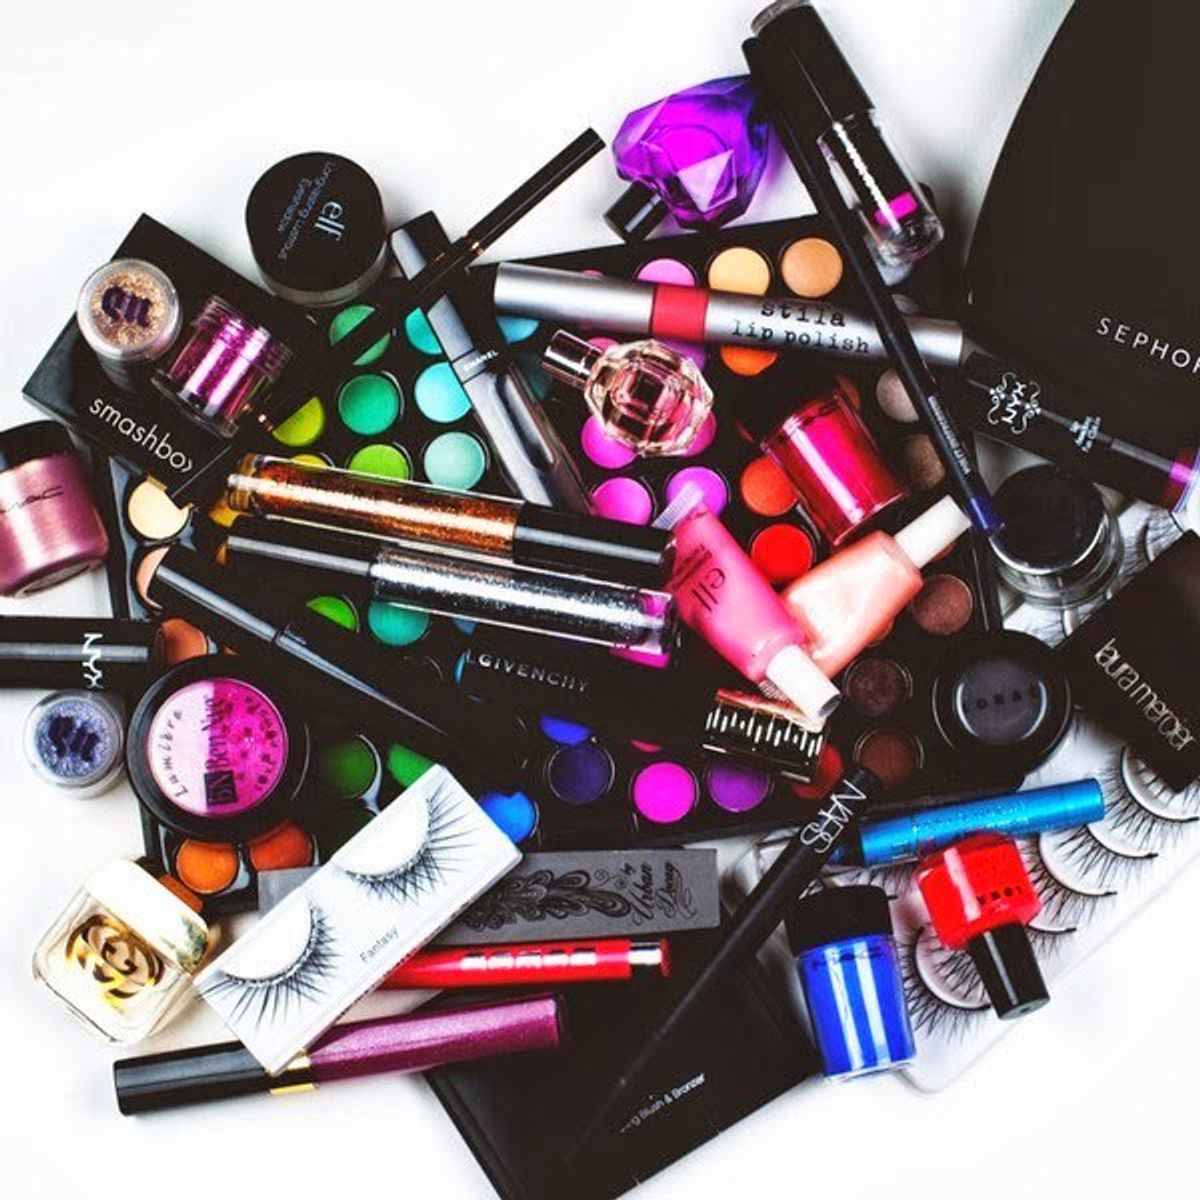 Why Is Makeup So Complicated?